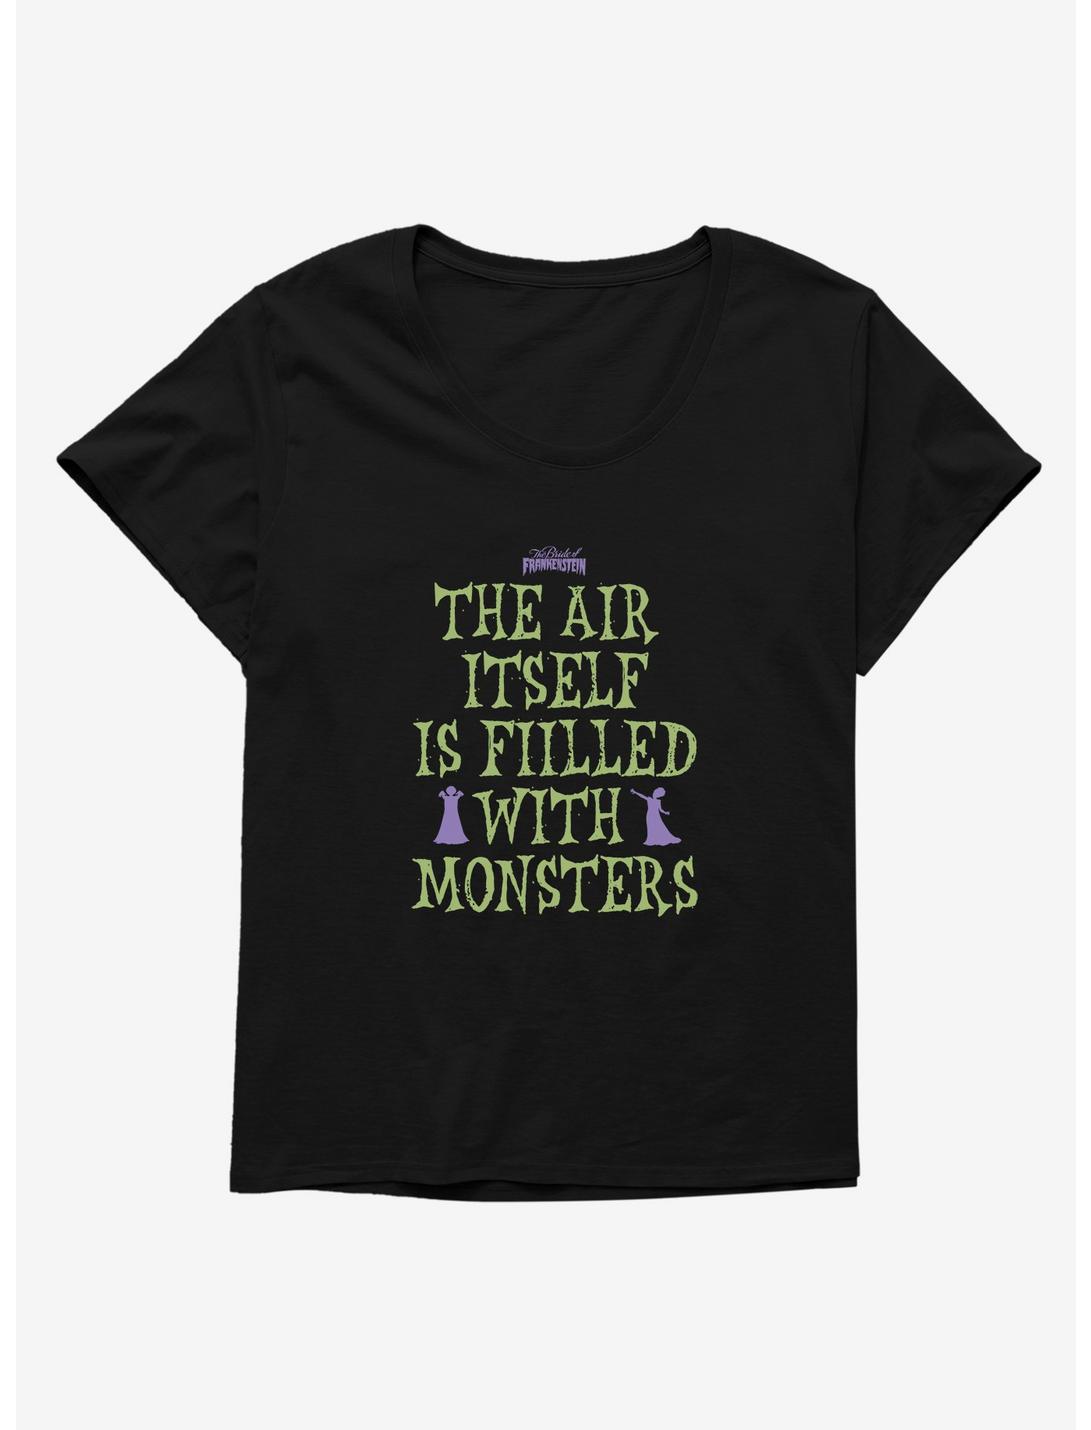 Bride Of Frankenstein Air Filled With Monsters Womens T-Shirt Plus Size, BLACK, hi-res